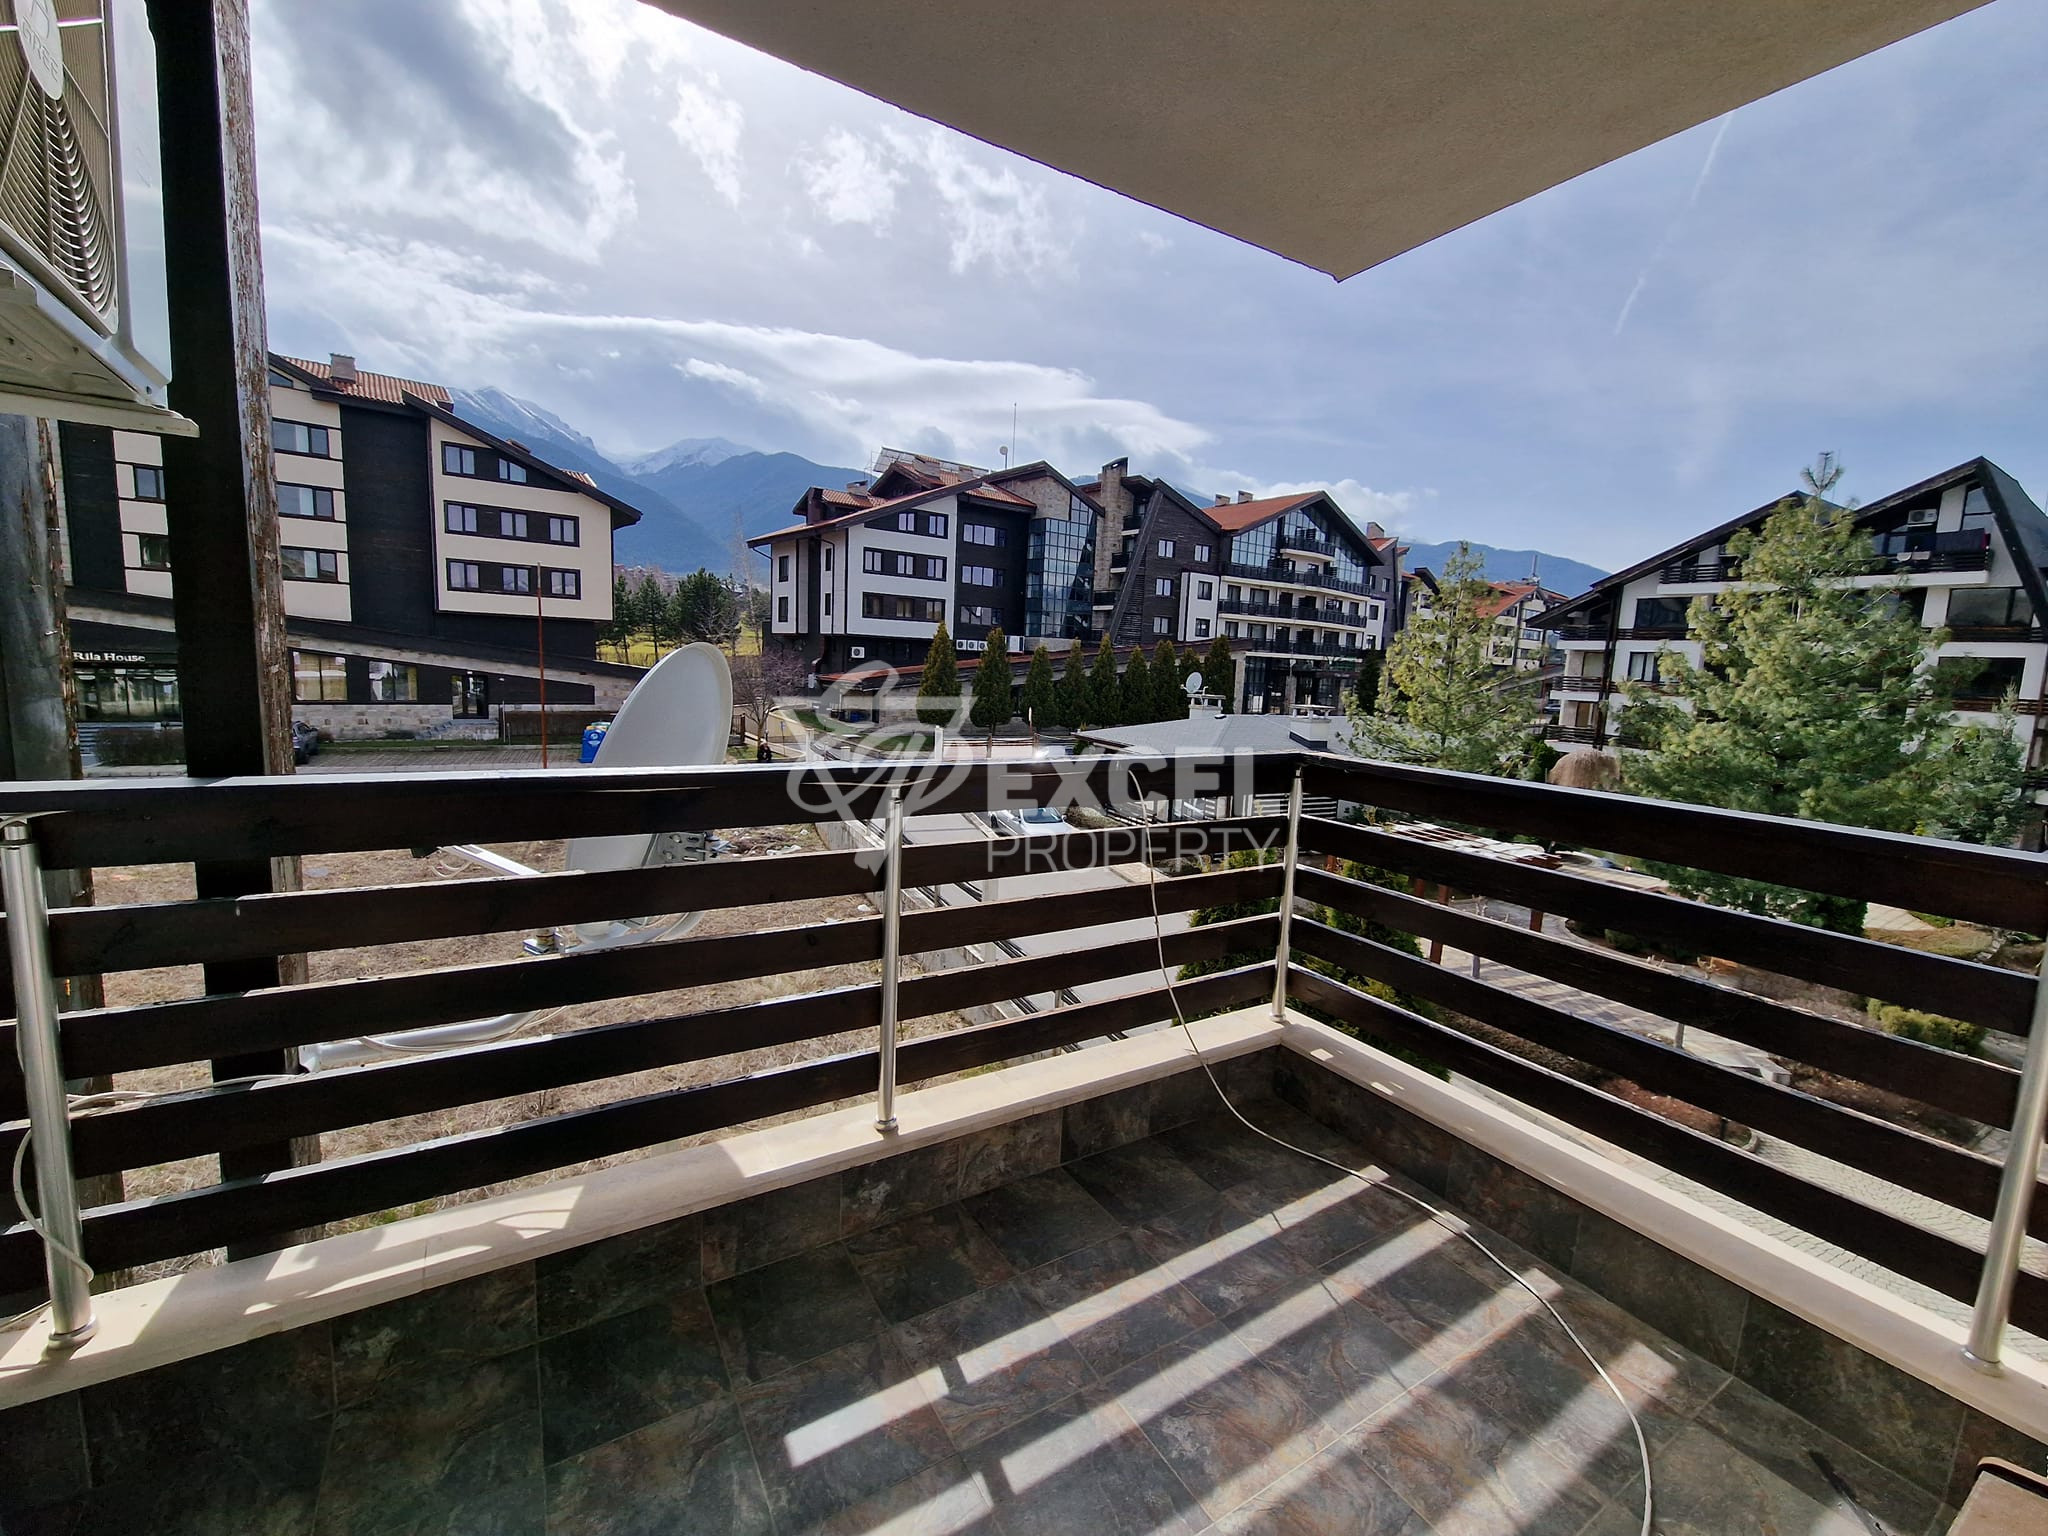 Furnished One-bedroom apartment with air conditioning at a bargain price for sale in Aspen Resort